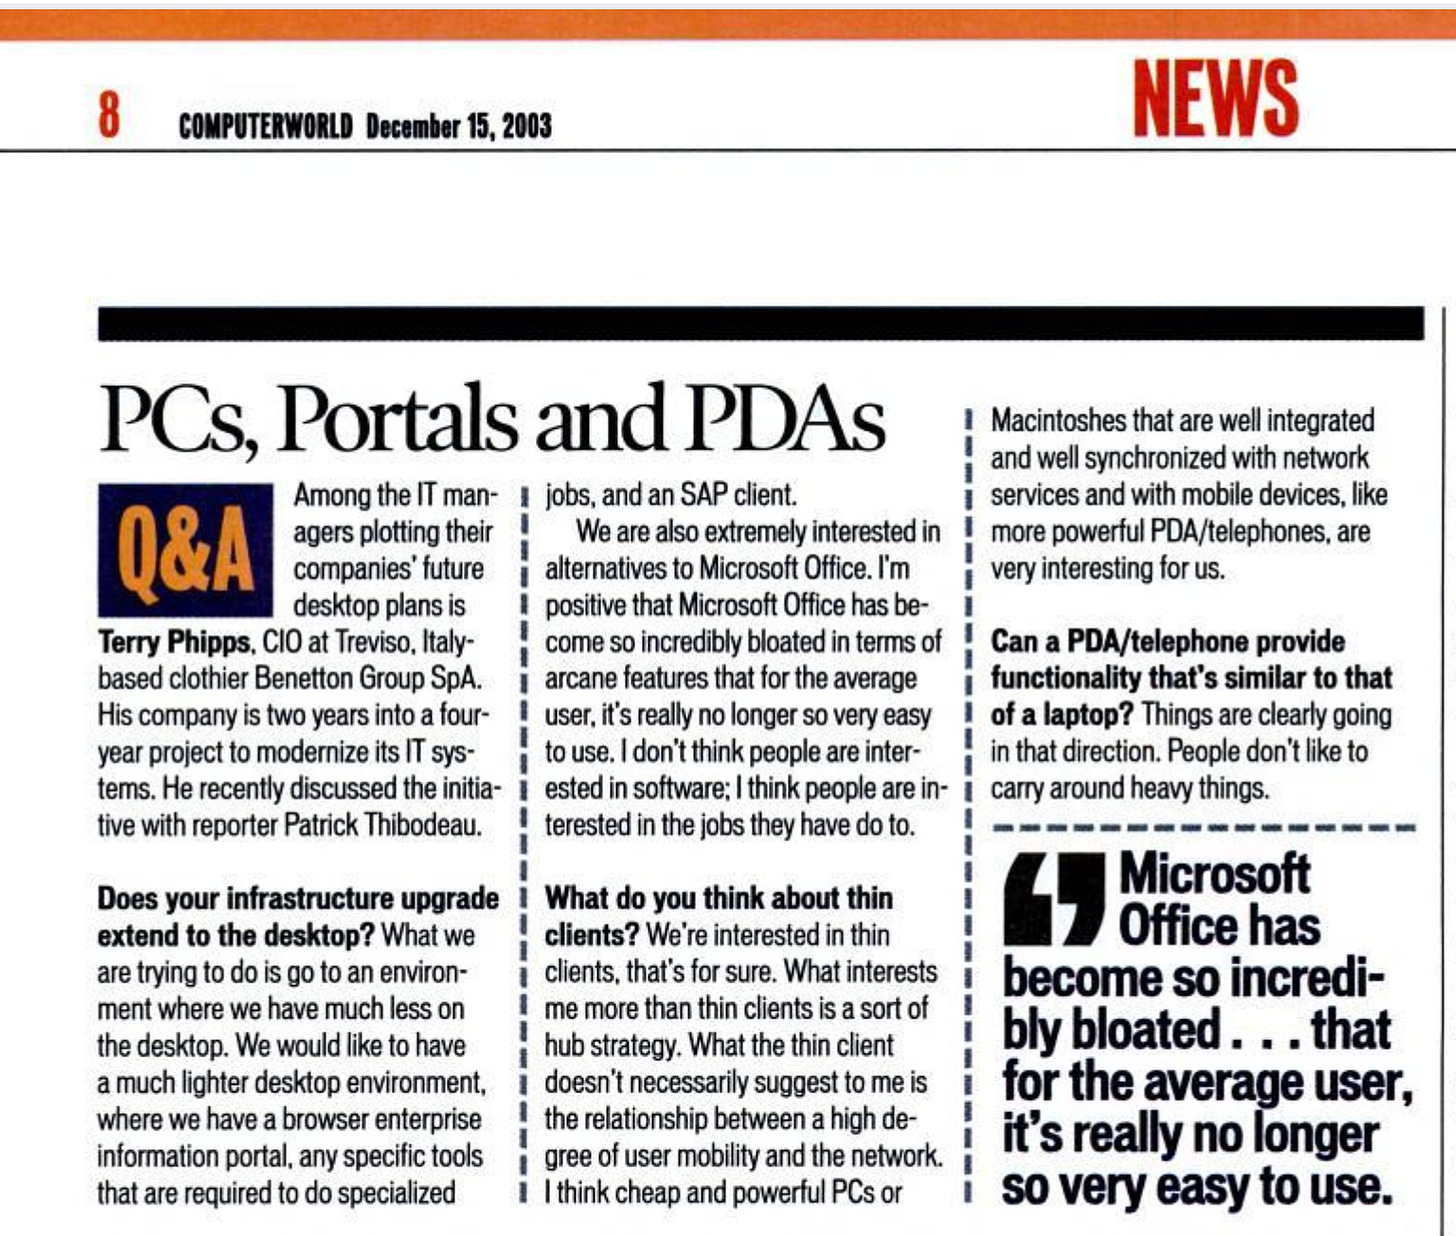 PCs, Portals and PDAs Among the IT man- 1 jobs, and an SAP client. Q&A agers plotting their We are also extremely interested in companies' future alternatives to Microsoft Office. I'm desktop plans is positive that Microsoft Office has be- Terry Phipps, CIO at Treviso, Italy- come so incredibly bloated in terms of based clothier Benetton Group SpA. arcane features that for the average His company is two years into a four- user, it's really no longer so very easy year project to modernize its IT sys- to use. I don't think people are inter- tems. He recently discussed the initia- I ested in software; I think people are in- tive with reporter Patrick Thibodeau. terested in the jobs they have do to. Does your infrastructure upgrade 1 What do you think about thin extend to the desktop? What we clients? We're interested in thin are trying to do is go to an environ- clients, that's for sure. What interests ment where we have much less on me more than thin clients is a sort of the desktop. We would like to have hub strategy. What the thin client a much lighter desktop environment, doesn't necessarily suggest to me is where we have a browser enterprise the relationship between a high de- information portal, any specific tools gree of user mobility and the network. that are required to do specialized I I think cheap and powerful PCs or NEWS Macintoshes that are well integrated and well synchronized with network services and with mobile devices, like more powerful PDA/telephones, are very interesting for us. Can a PDA/telephone provide functionality that's similar to that of a laptop? Things are clearly going in that direction. People don't like to carry around heavy things. Microsoft Office has become so incredi- bly bloated , that for the average user, it's really no longer so very easy to use.